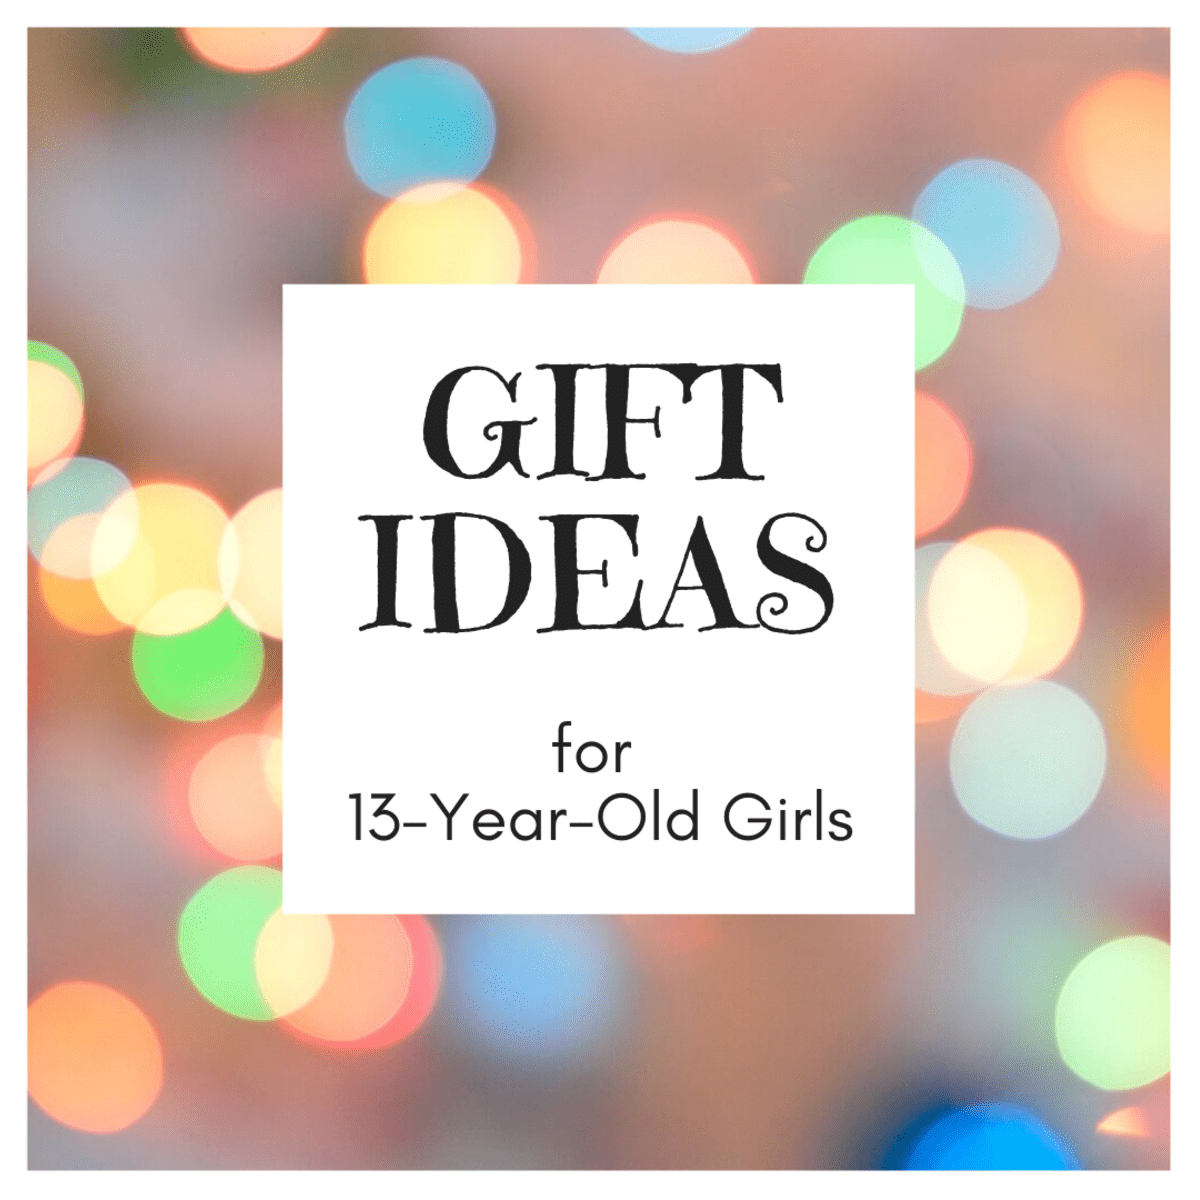 What are good birthday gifts for a girlfriend? - Quora